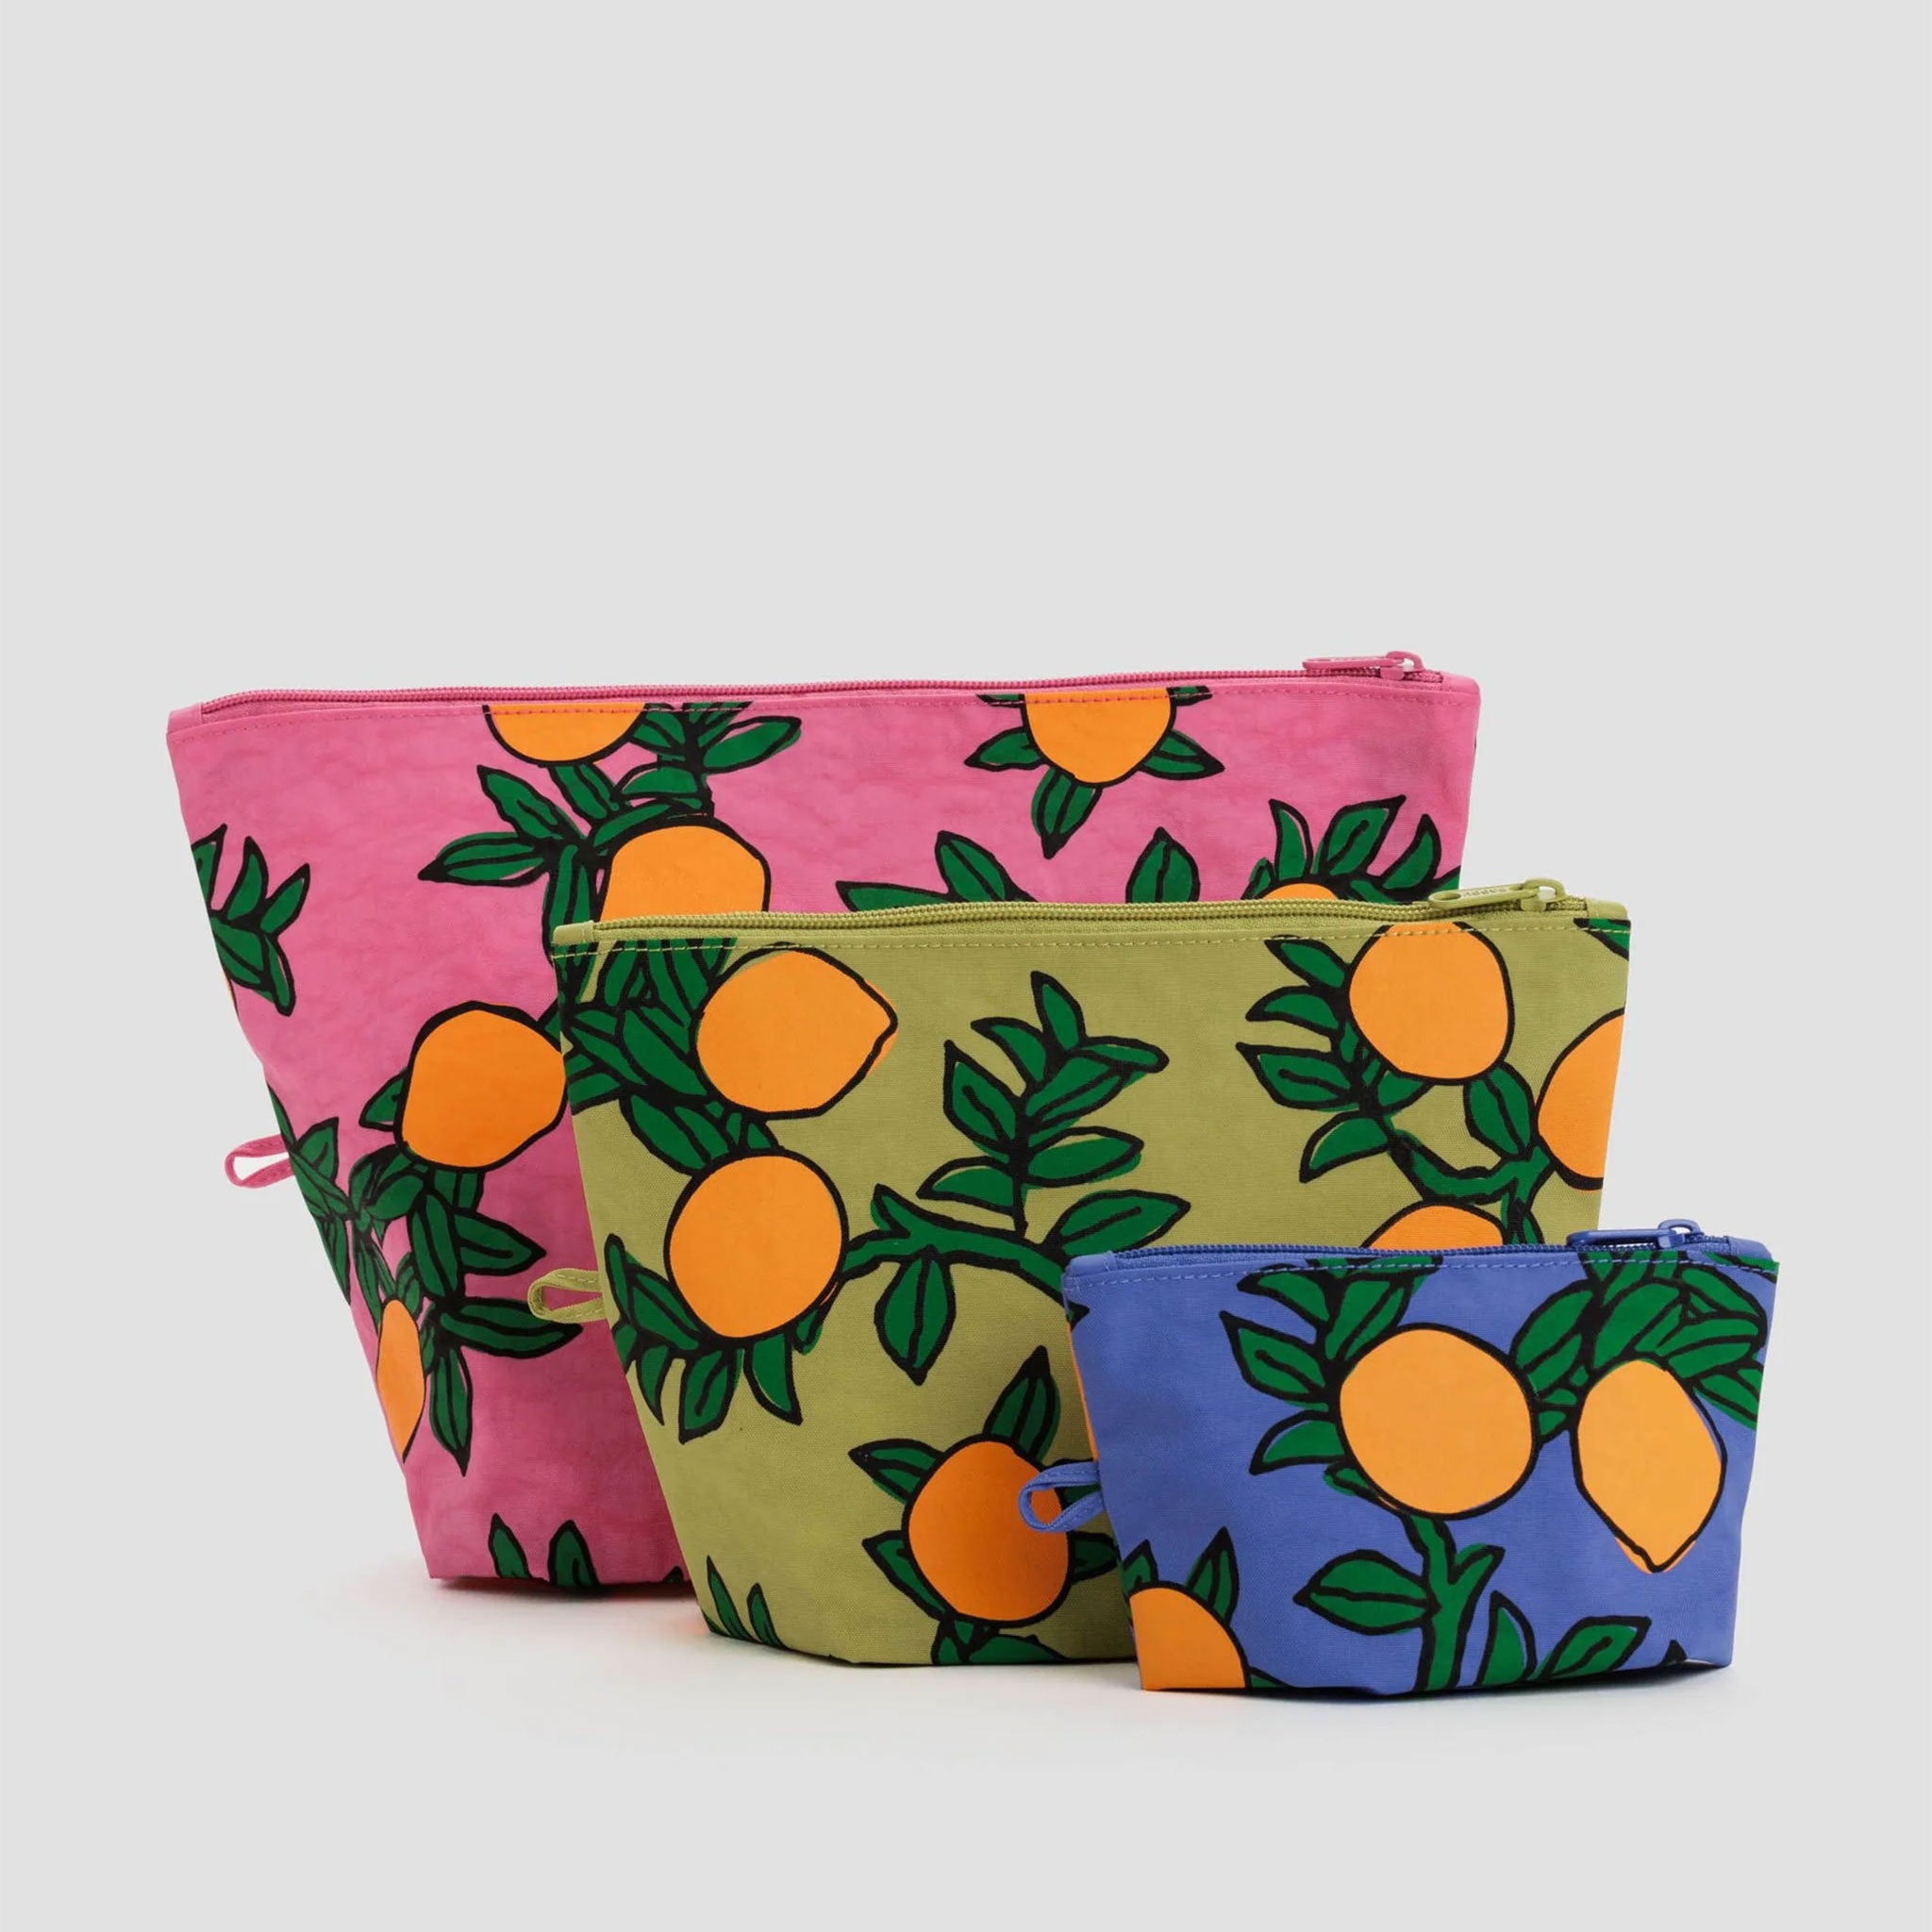 three pouches with orange tree print - one small blue, one medium green, and one large pink